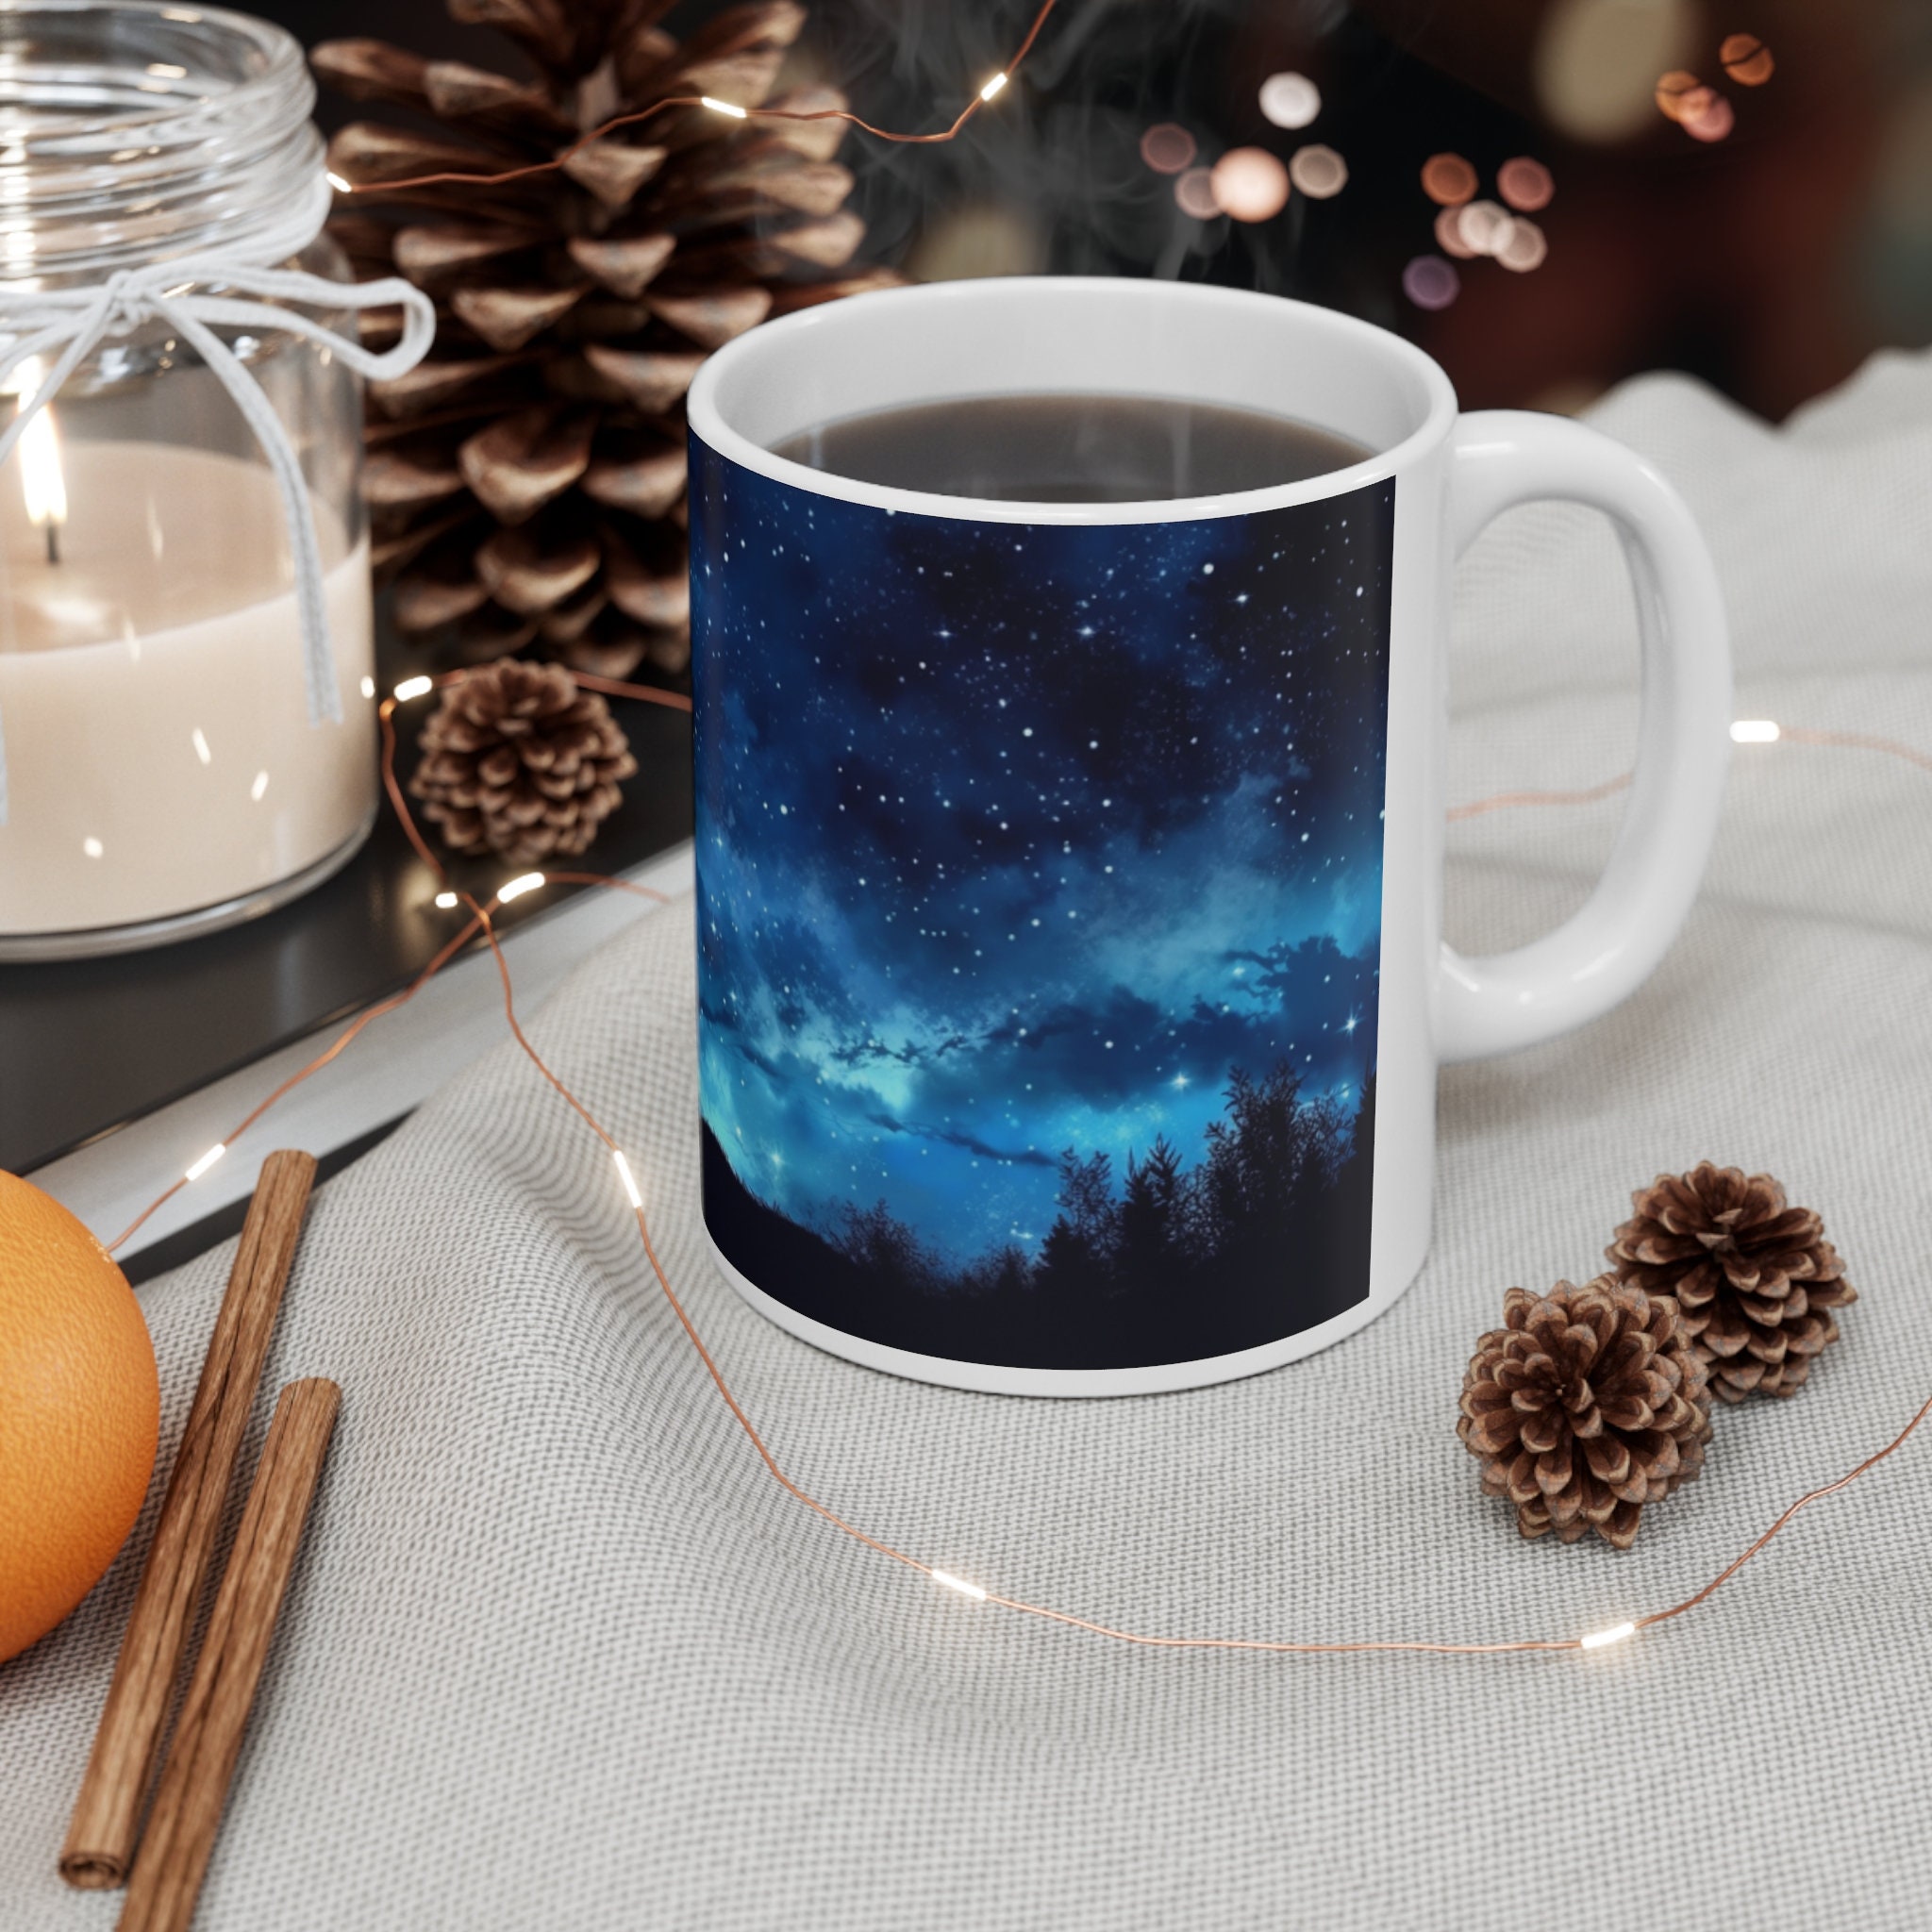 Night + Day Mugs–Our Place